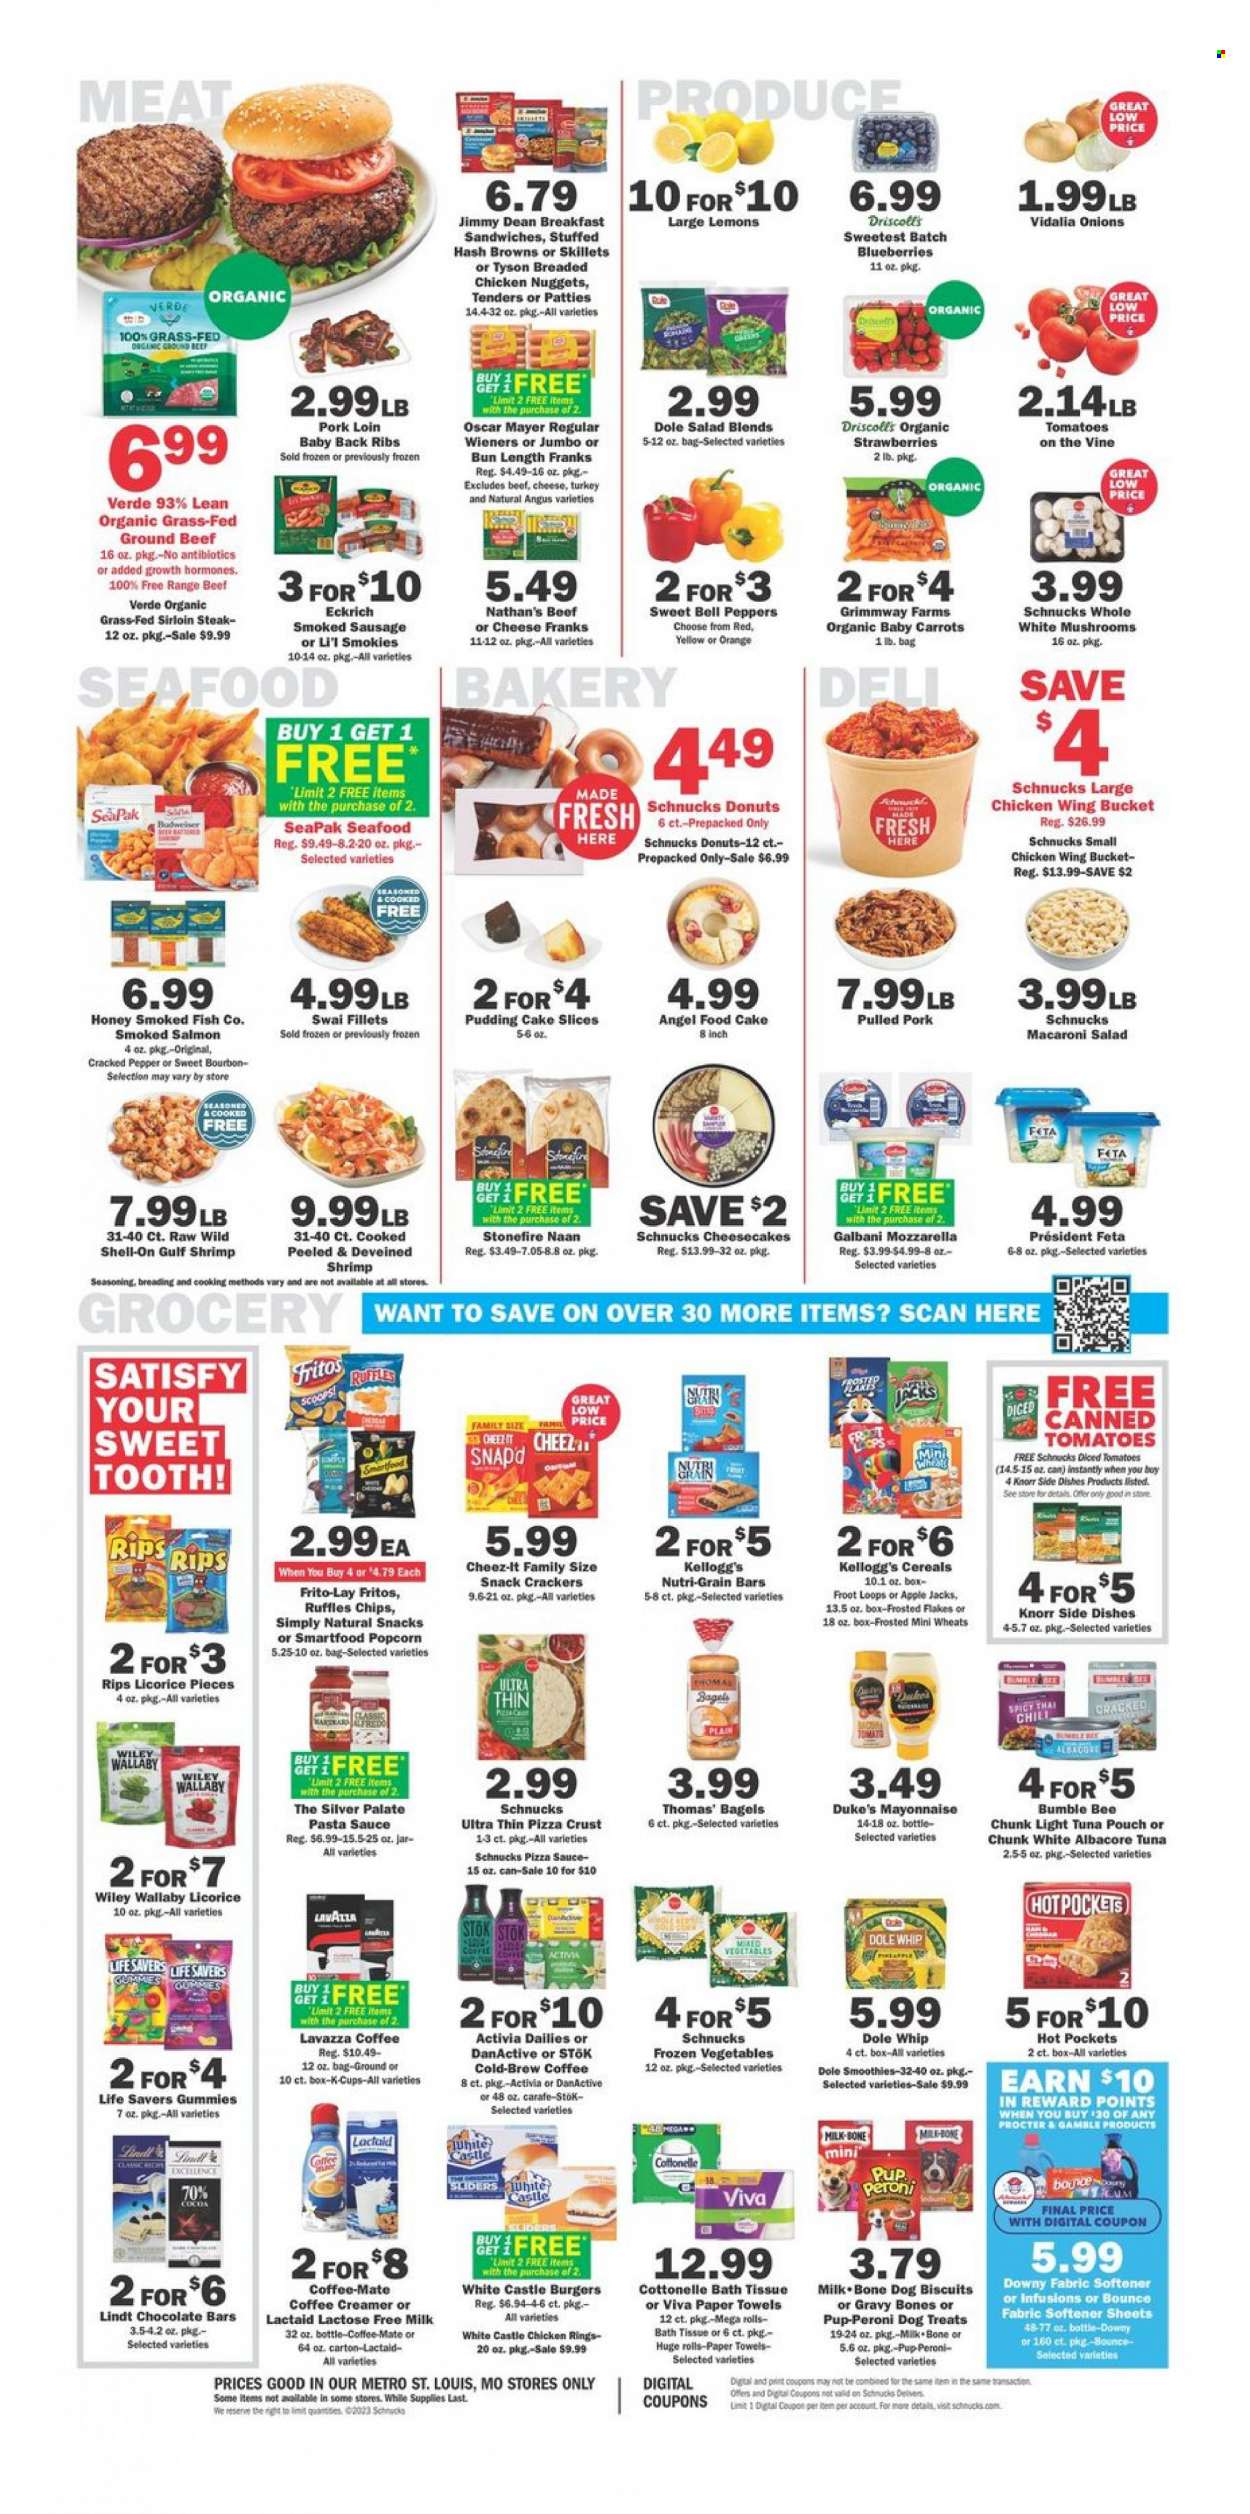 thumbnail - Schnucks Flyer - 05/31/2023 - 06/06/2023 - Sales products - mushrooms, bagels, cake, cheesecake, donut, Angel Food, bell peppers, carrots, onion, salad, Dole, peppers, blueberries, strawberries, salmon, smoked salmon, tuna, seafood, fish, shrimps, swai fillet, hot pocket, pasta sauce, nuggets, hamburger, Bumble Bee, Knorr, sauce, fried chicken, chicken nuggets, pulled pork, Jimmy Dean, ready meal, snack, Oscar Mayer, smoked sausage, frankfurters, macaroni salad, Lactaid, Président, feta, Galbani, Activia, Coffee-Mate, lactose free milk, creamer, mayonnaise, frozen vegetables, hash browns, Lindt, cereal bar, crackers, Kellogg's, biscuit, chocolate bar, Fritos, Smartfood, popcorn, Frito-Lay, Cheez-It, Ruffles, salty snack, canned tomatoes, light tuna, diced tomatoes, cereals, Frosted Flakes, Nutri-Grain, spice, honey, smoothie, coffee capsules, K-Cups, Lavazza, beer, Castle, turkey, beef meat, beef sirloin, ground beef, steak, sirloin steak, ribs, pork loin, pork meat, pork ribs, pork back ribs, bath tissue, Cottonelle, kitchen towels, paper towels, fabric softener, Bounce, Downy Laundry, animal treats, dog food, dog biscuits, Pup-Peroni, Budweiser, lemons. Page 4.